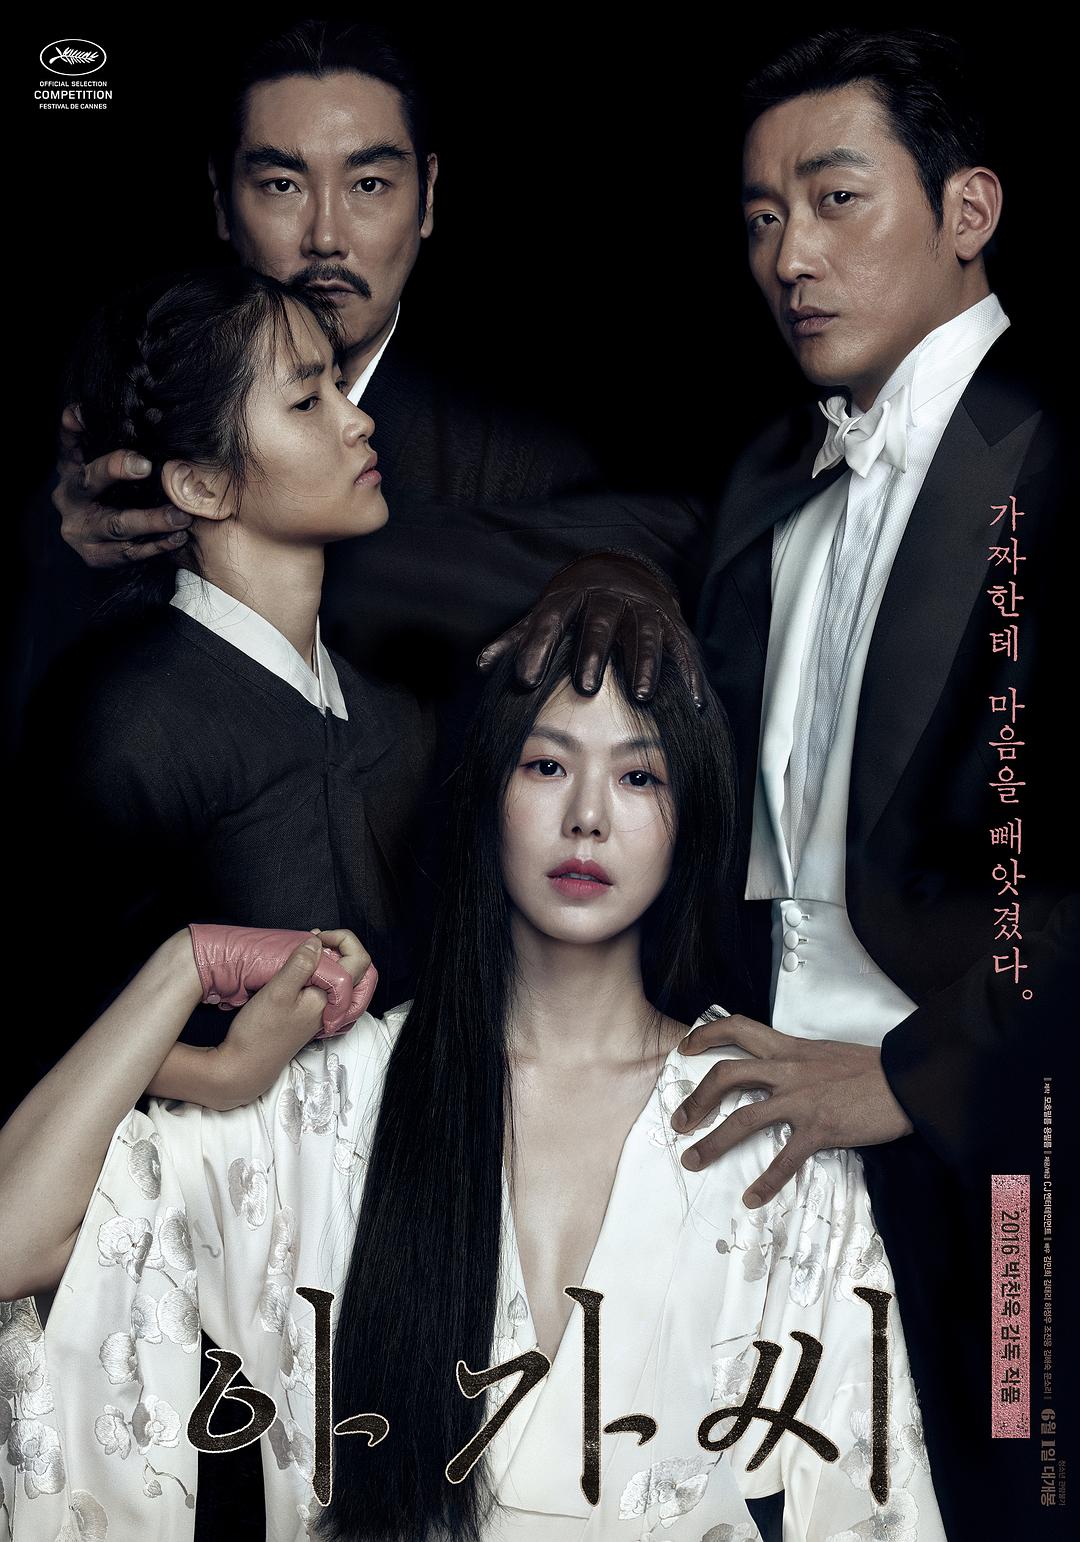 С The.Handmaiden.2016.LIMITED.EXTENDED.1080p.BluRay.x264-USURY 14.21GB-1.png